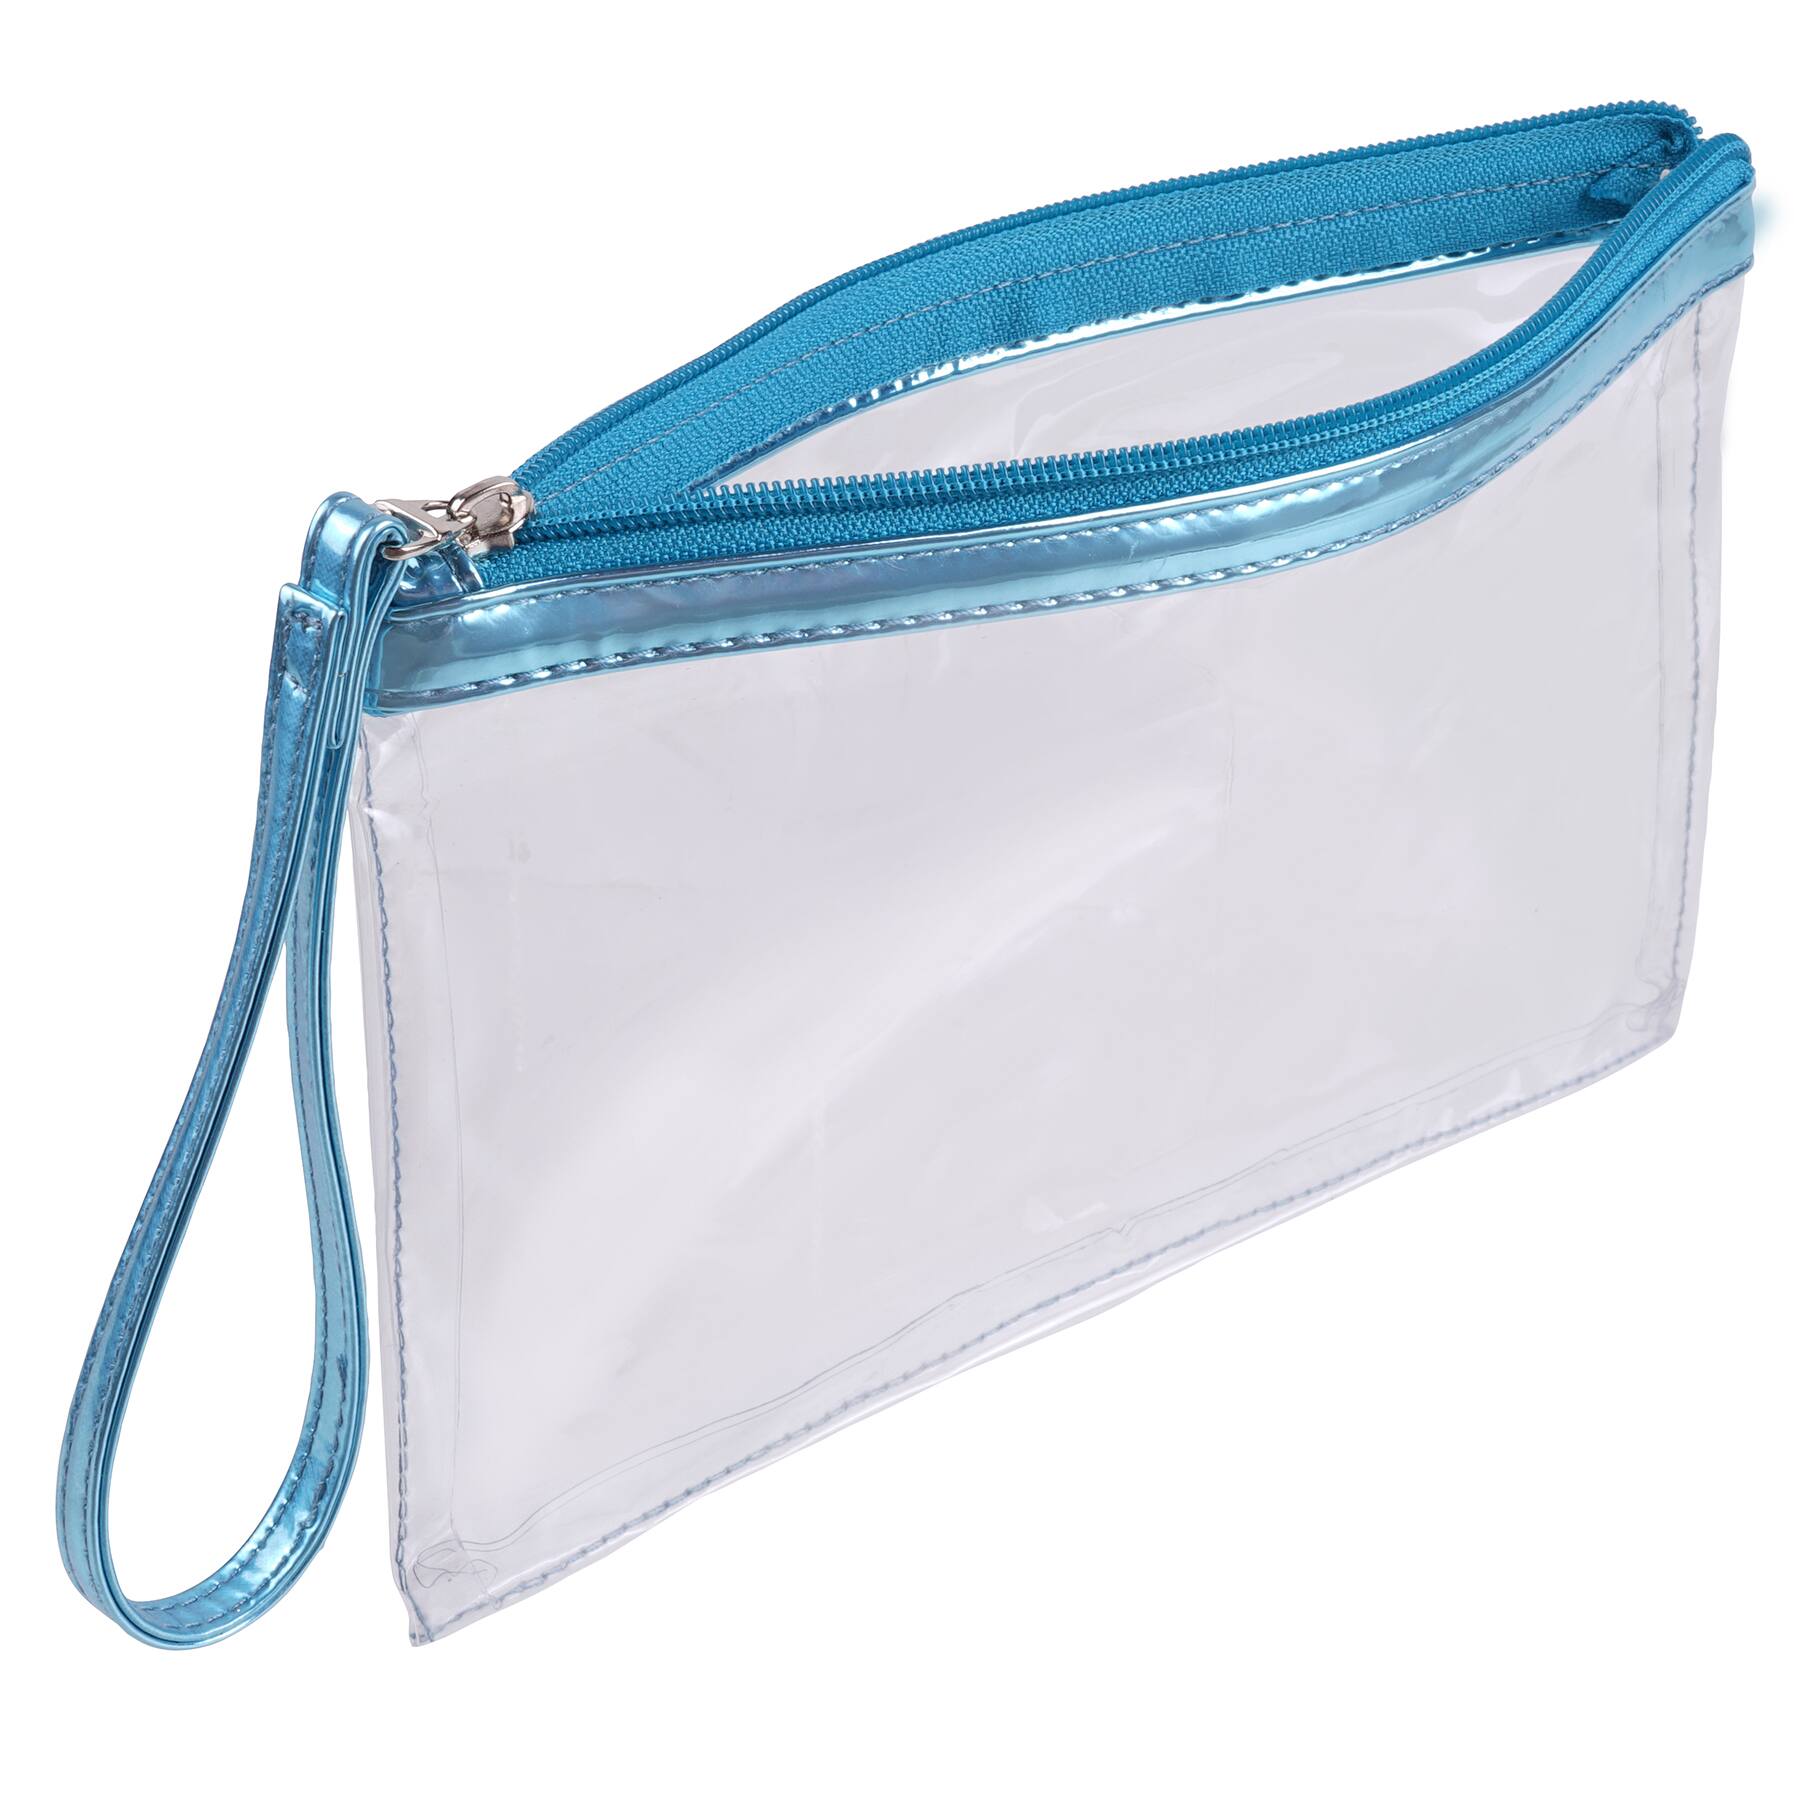 Shop For The Pvc Pouch By Imagin8 At Michaels